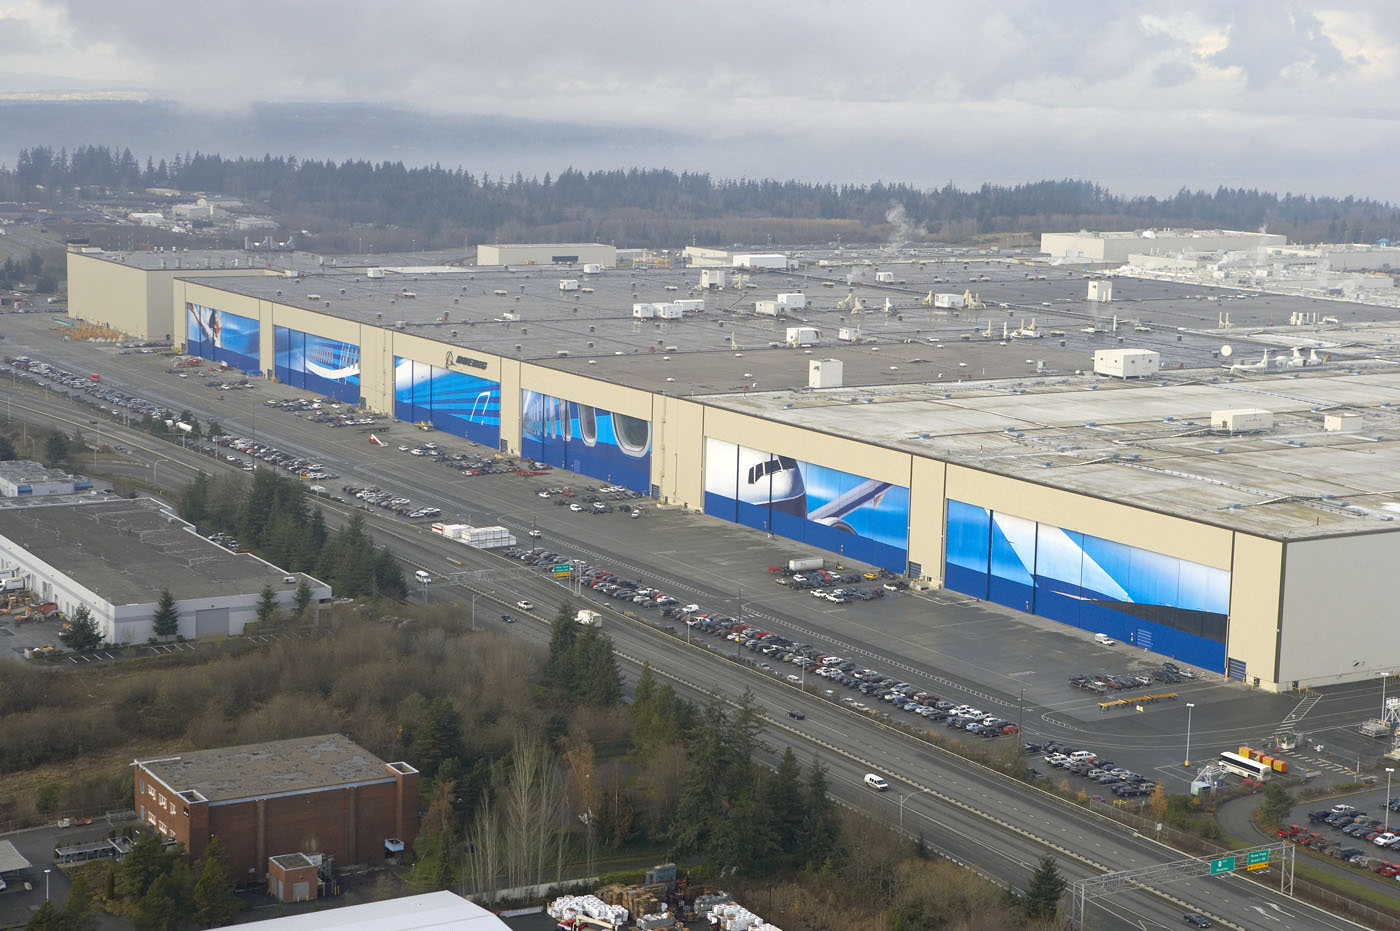 Boeing's Everett Factory. Image: Airchive.com